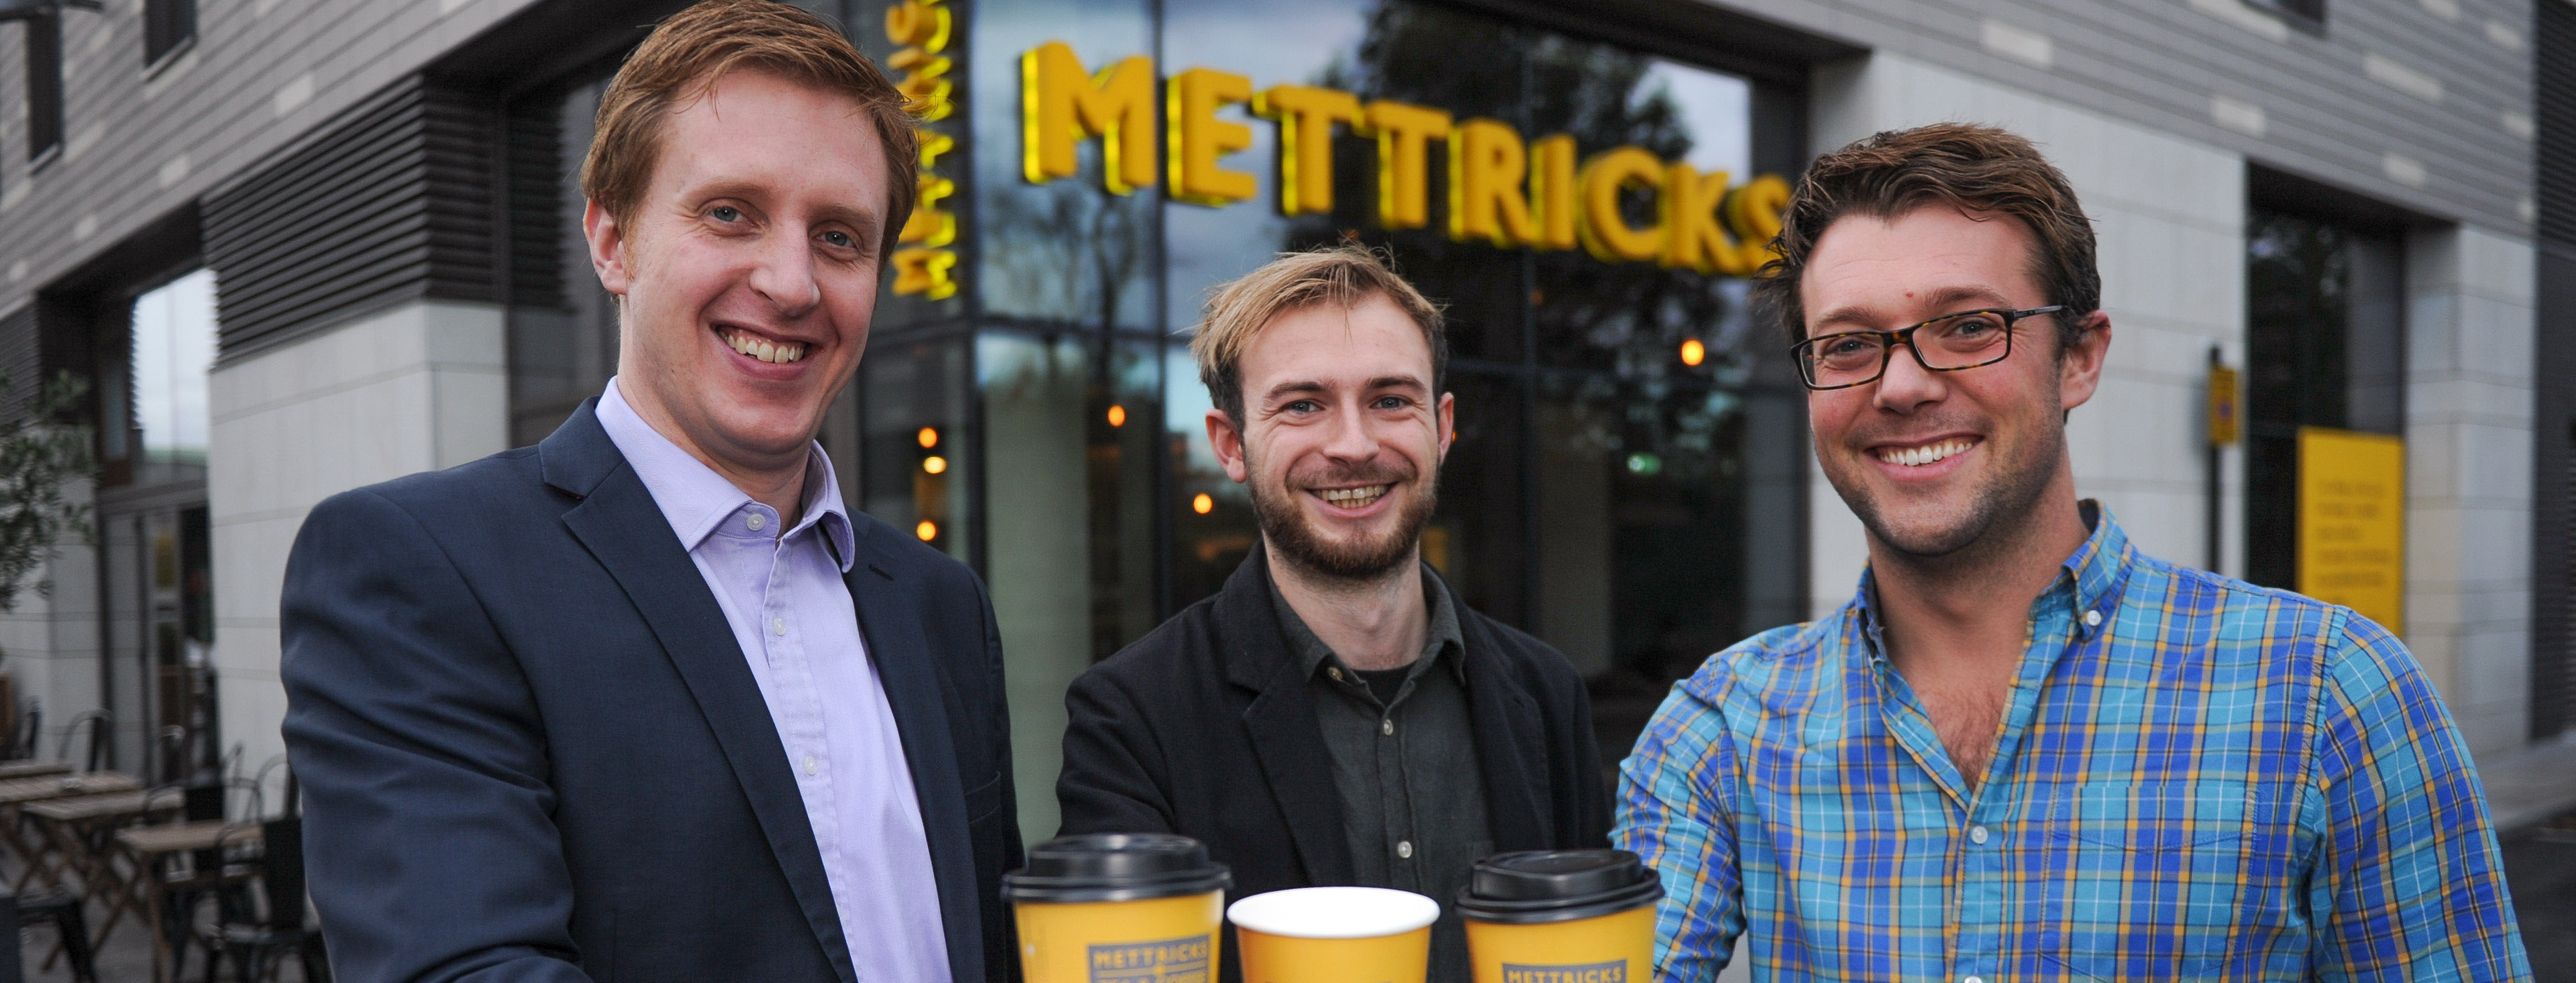 Solent's Dr Laurie Wright with Sam Williams, and Spencer from Mettricks